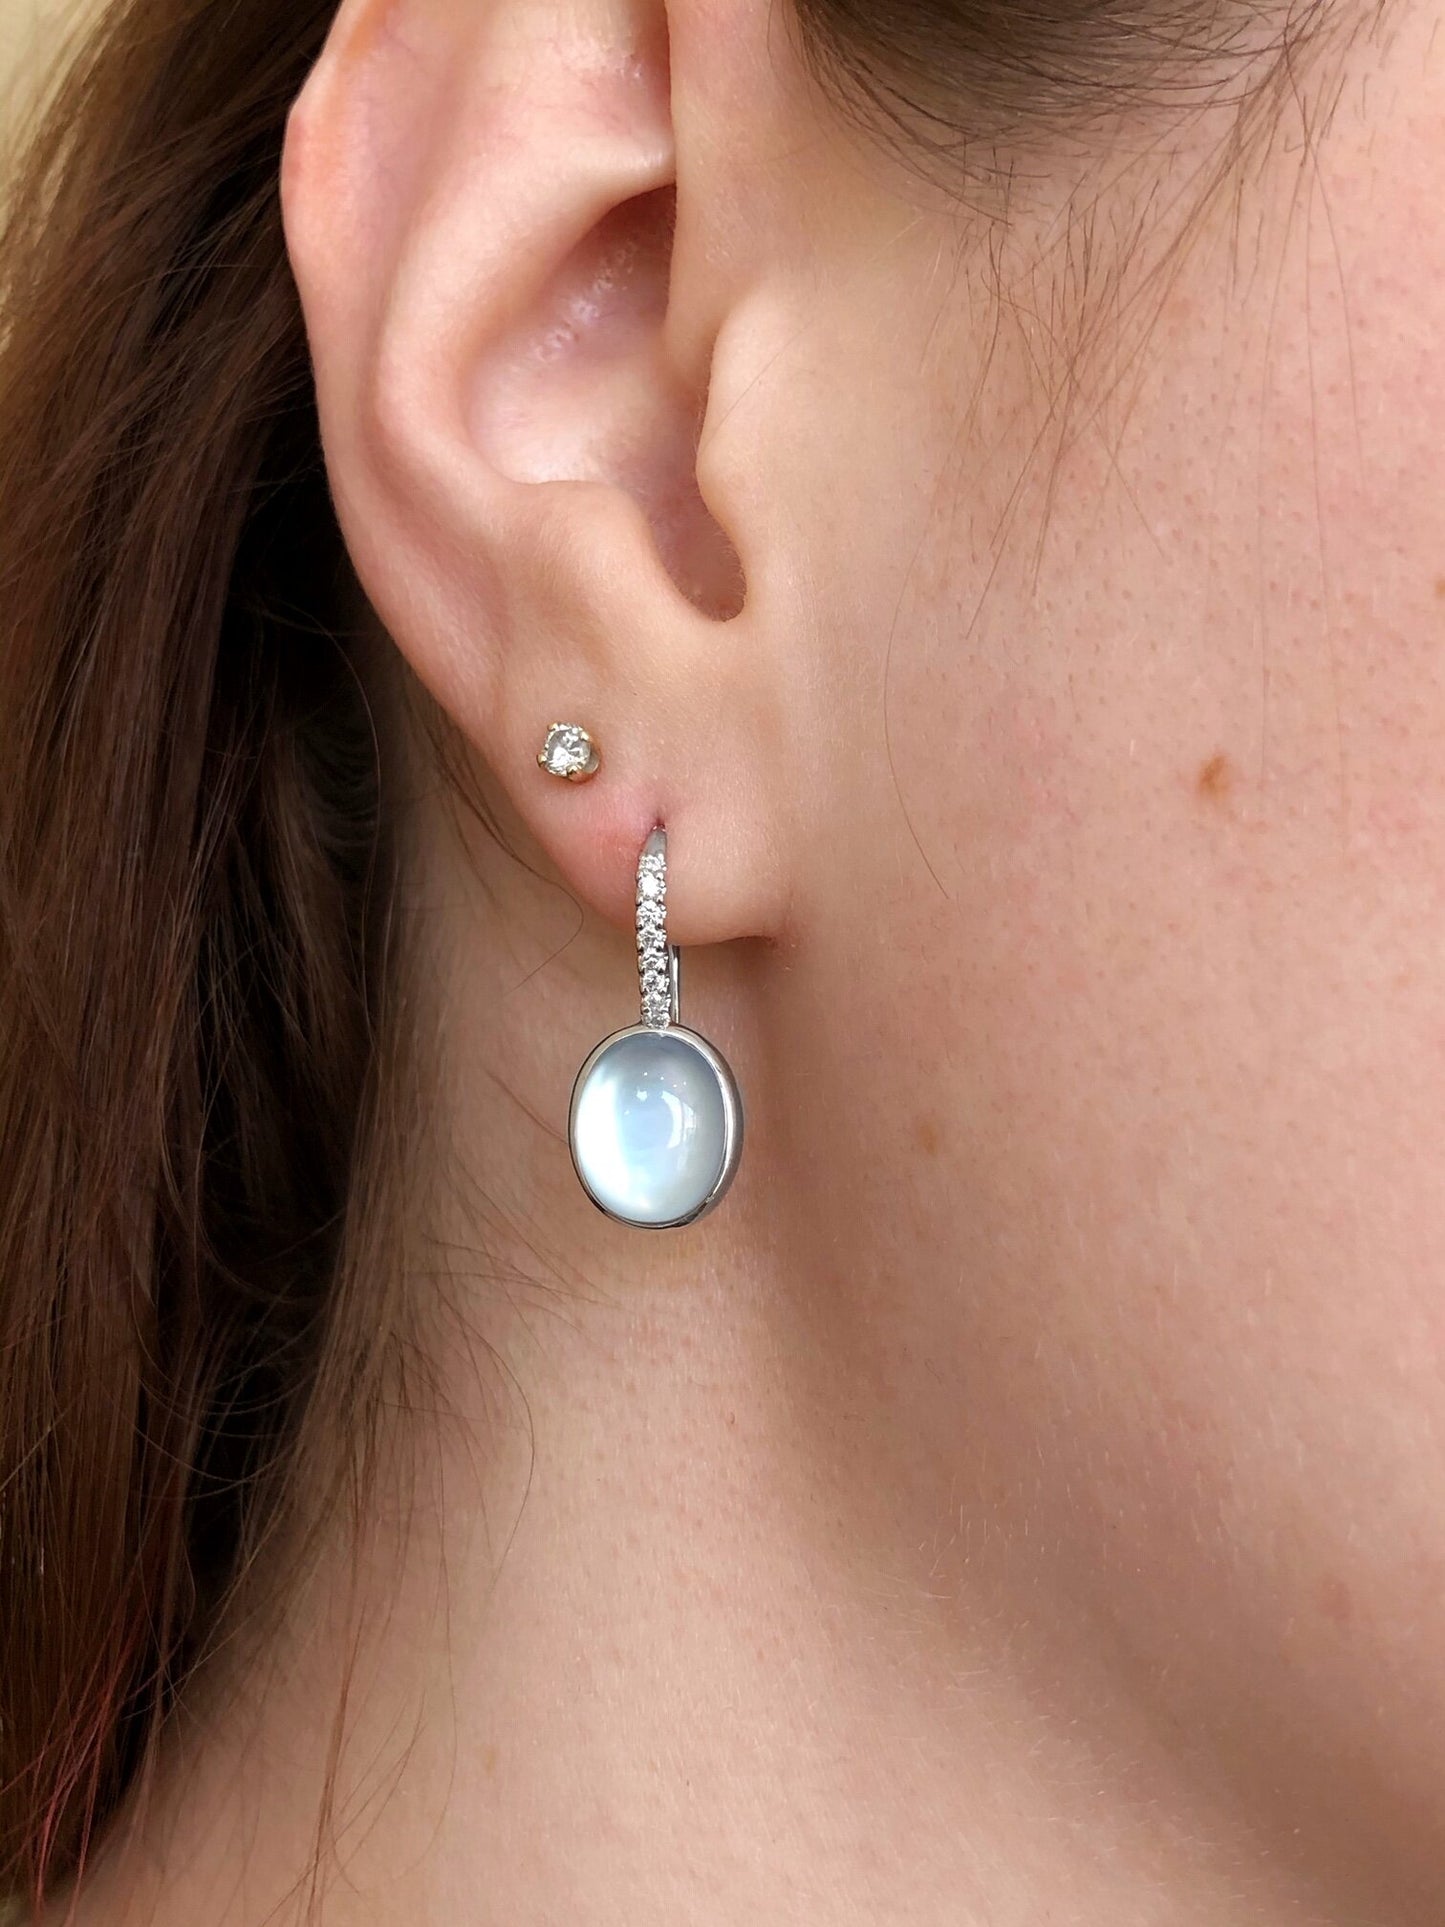 Blue Topaz Over Mother of Pearl Earrings